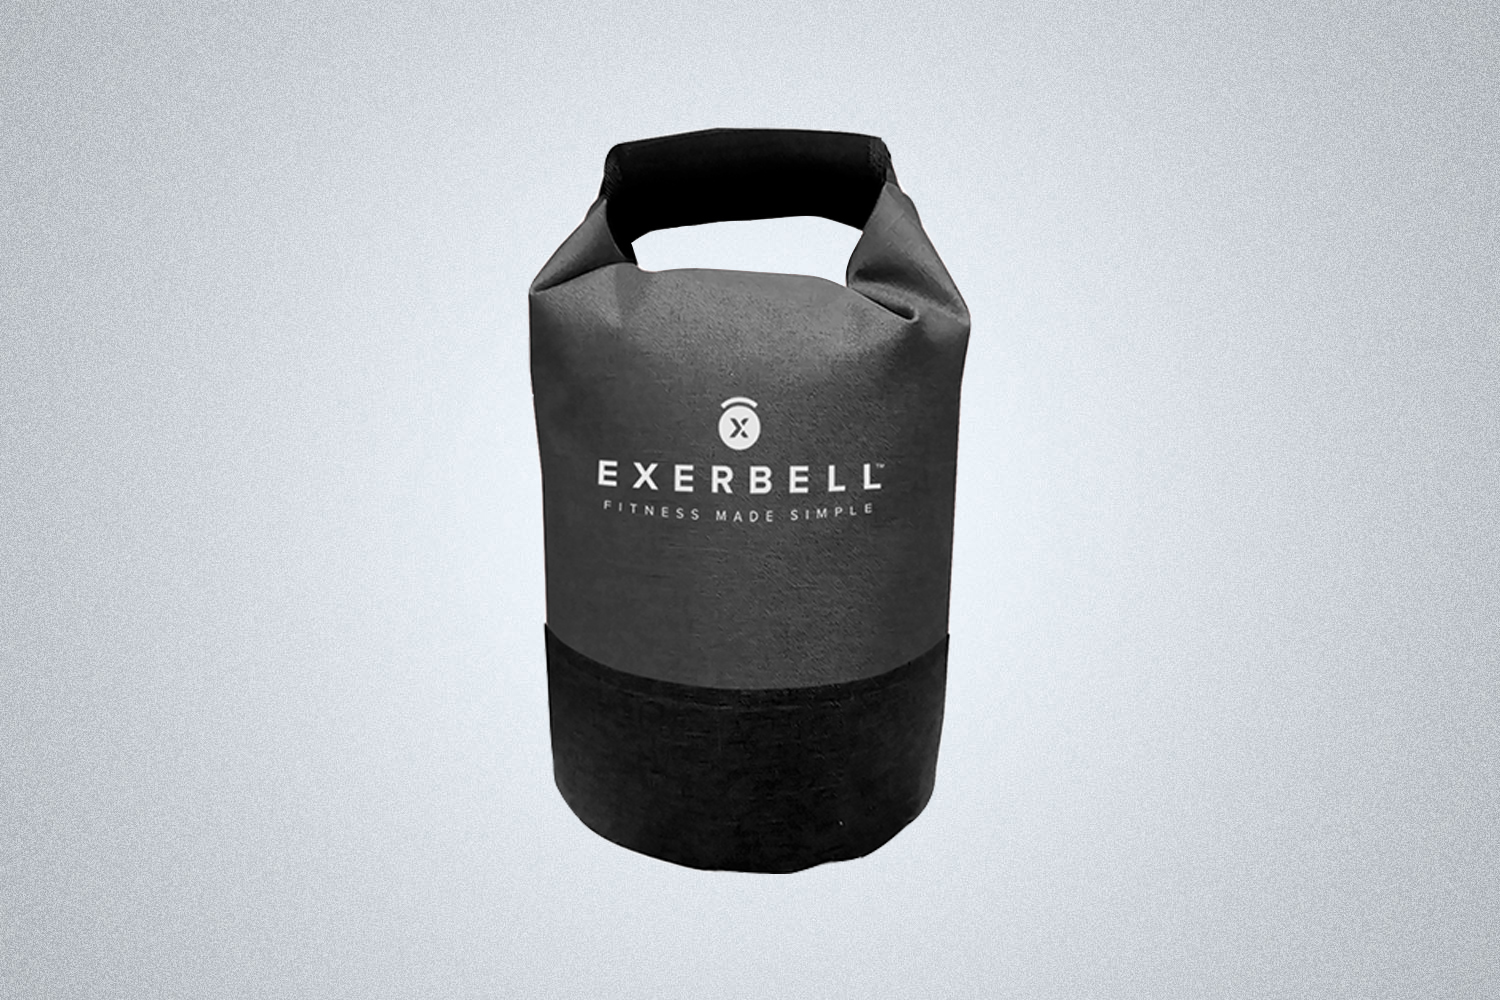 The Exerbell is a portable kettlebell filled with sand or water for fitness regimens that use kettlebells and is one of the best fitness gear of 2021